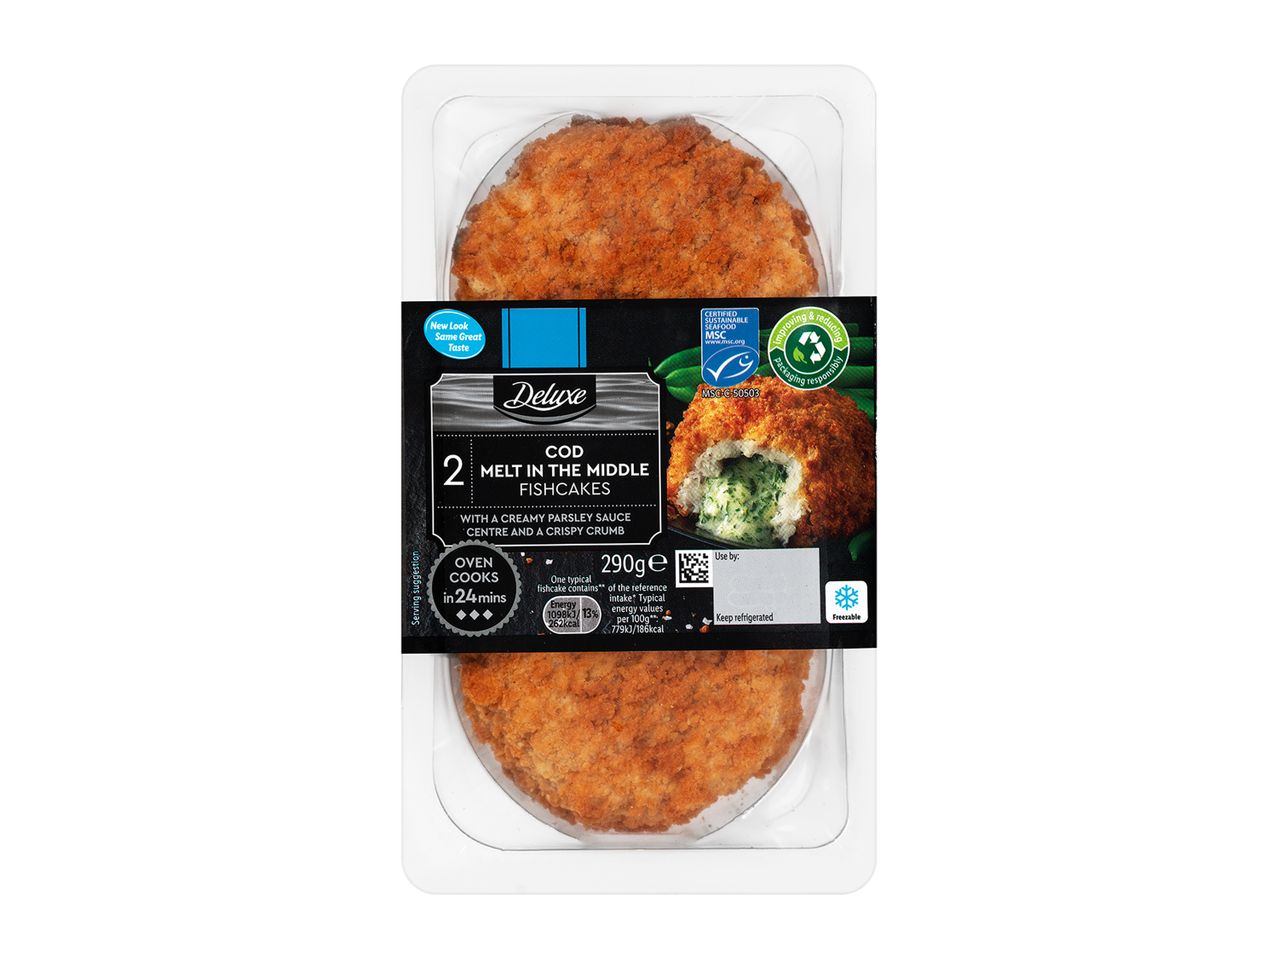 Go to full screen view: Deluxe 2 Cod Melt in the Middle Fishcakes - Image 1